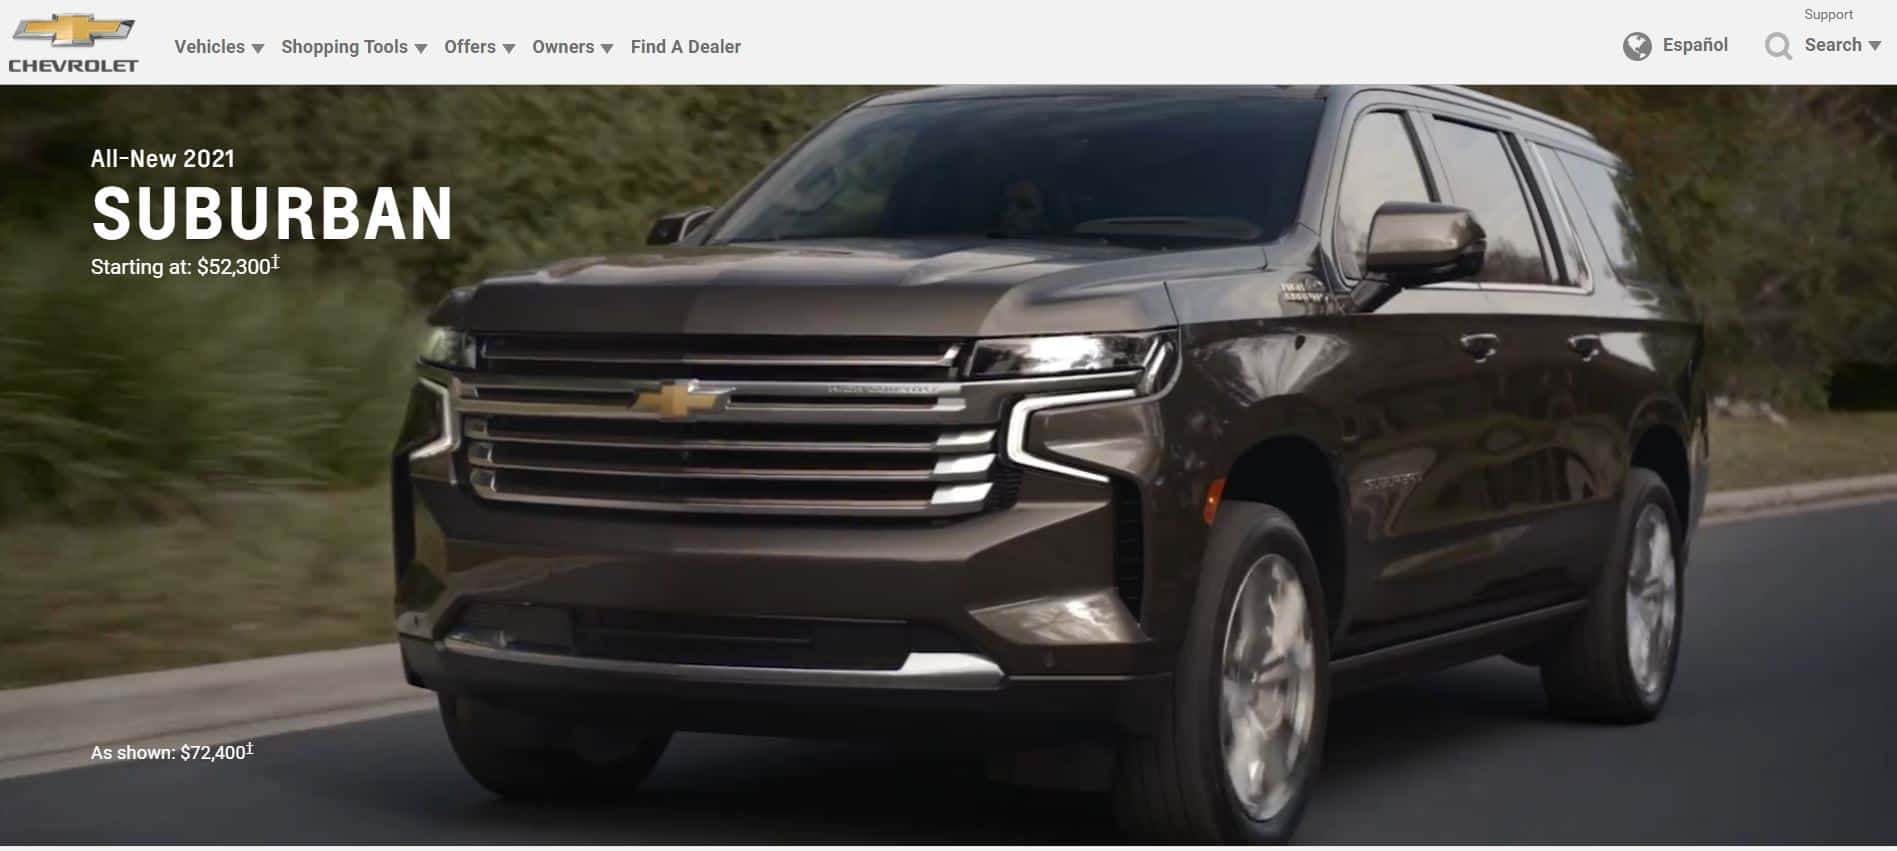 screenshot of the Chevy Suburban sales page